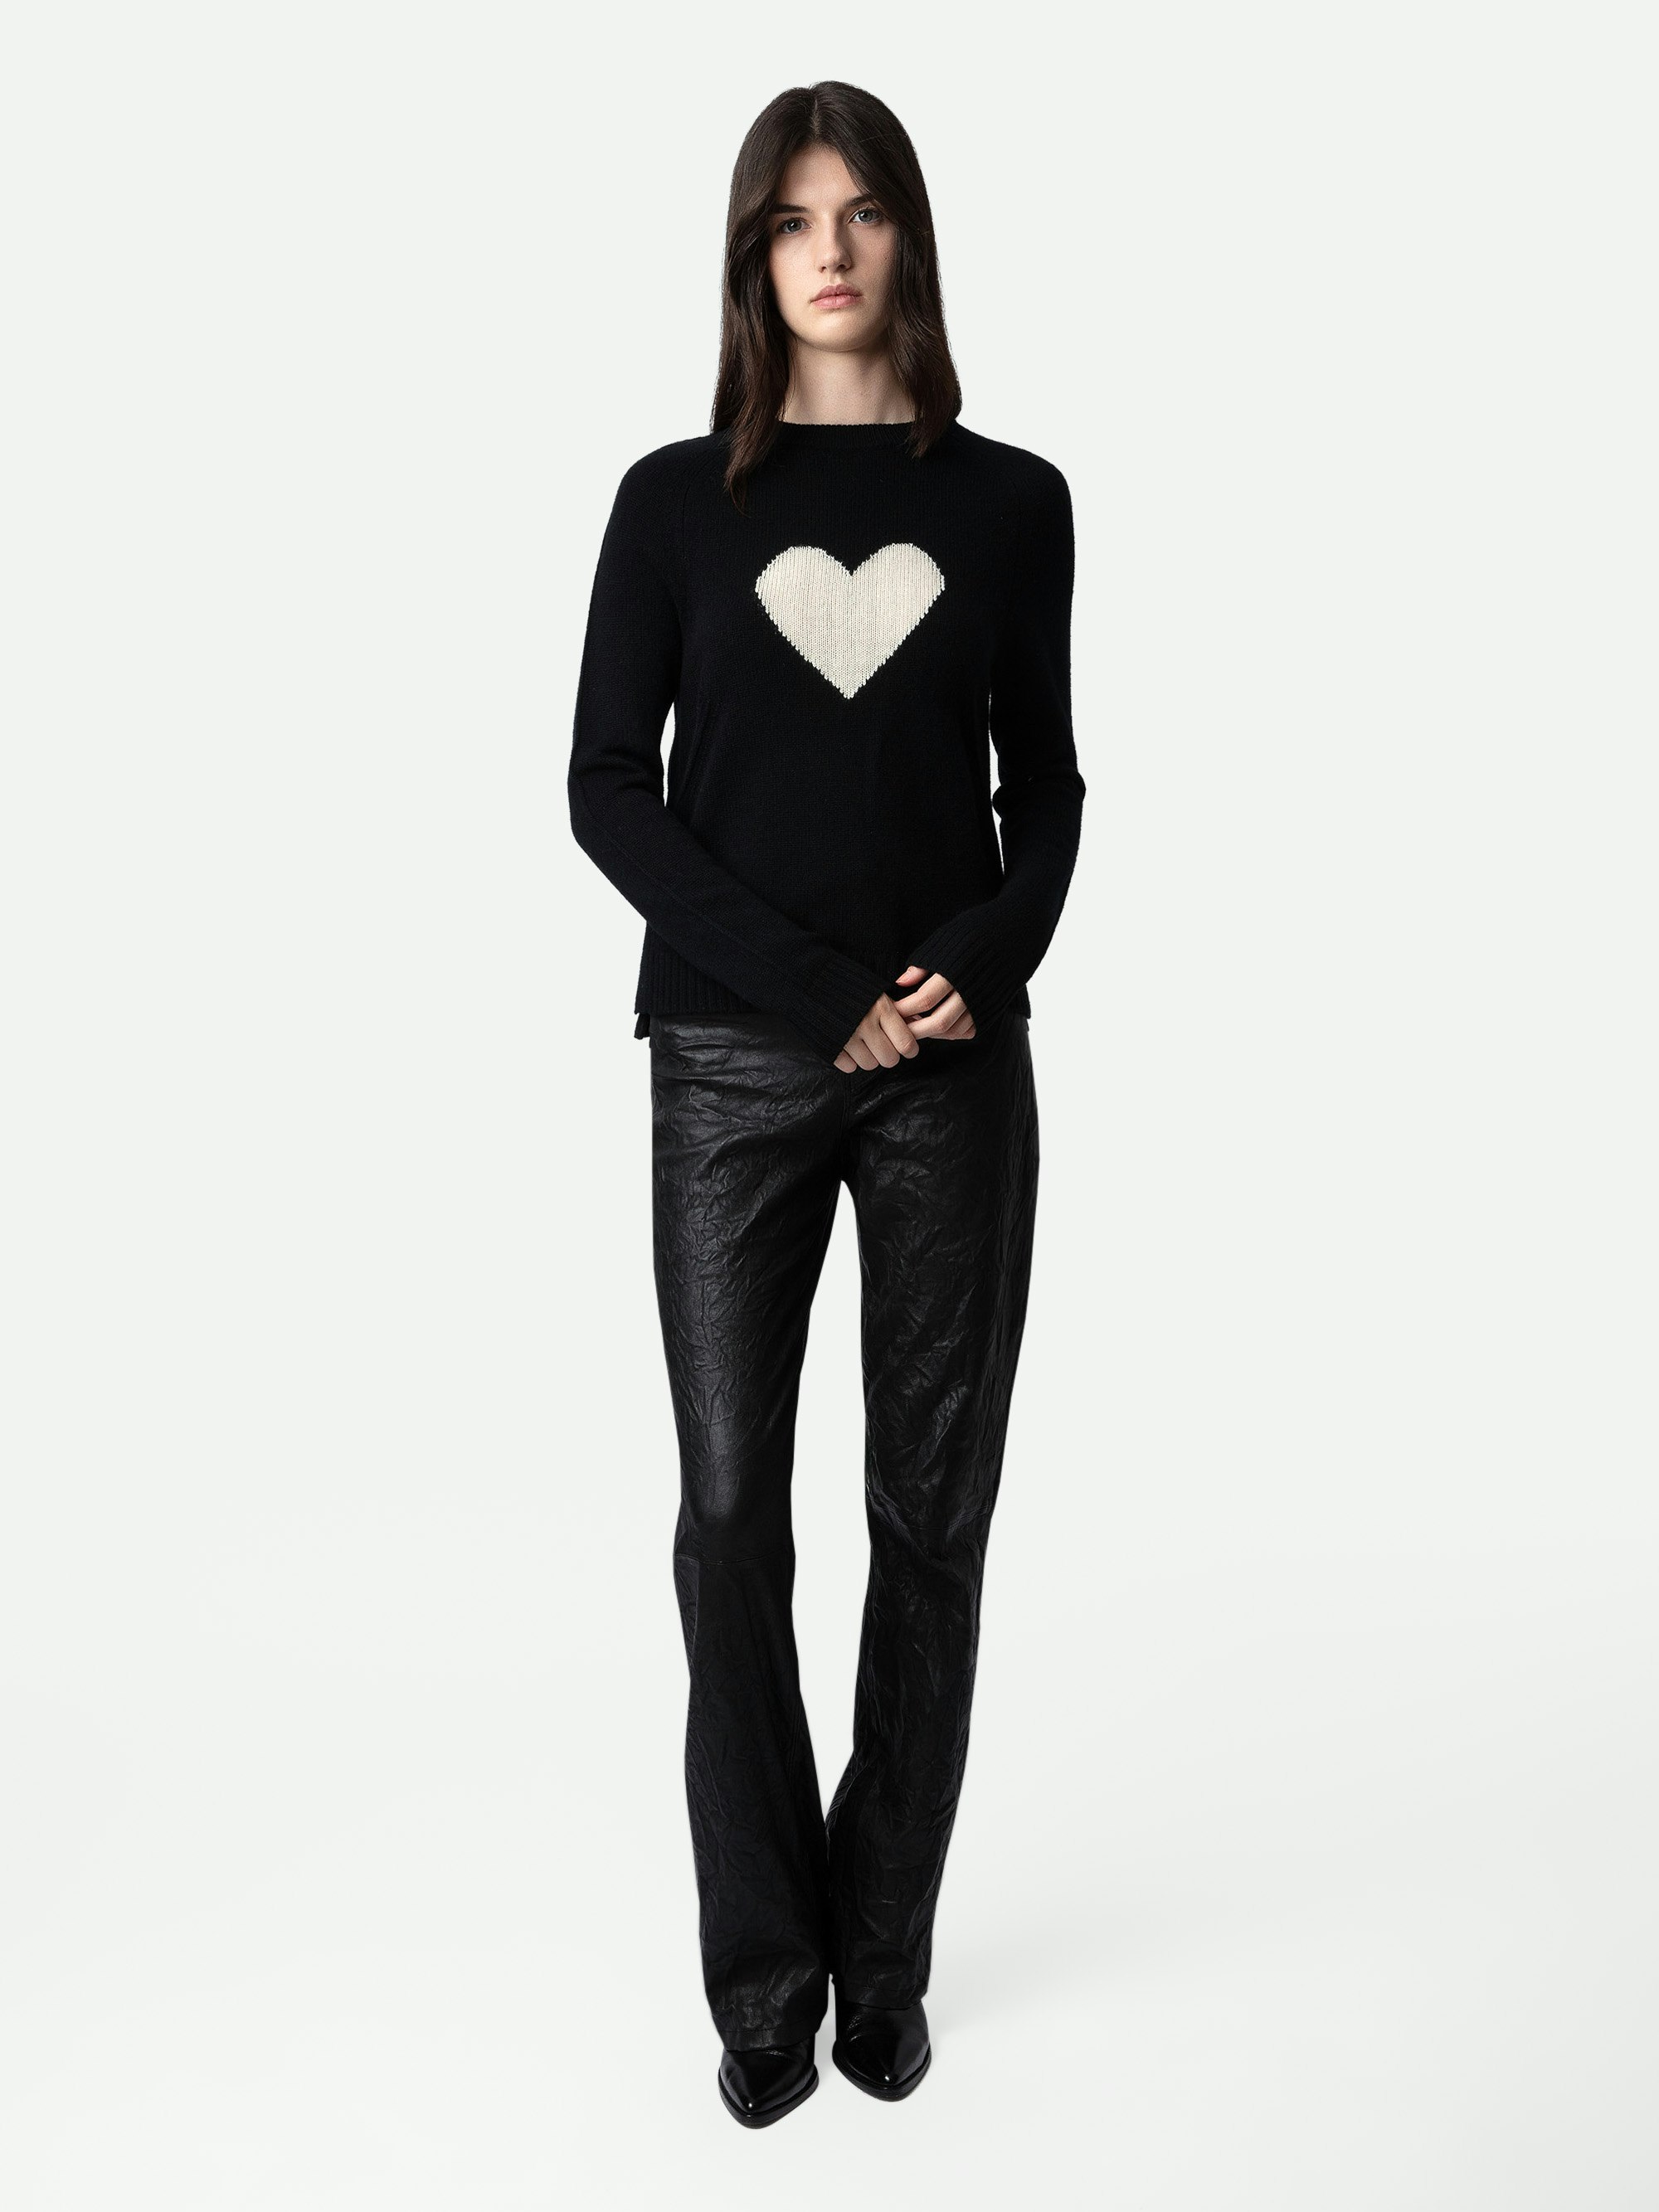 Lili Jumper 100% Cashmere - Black 100% cashmere jumper with heart embellishment on the front.